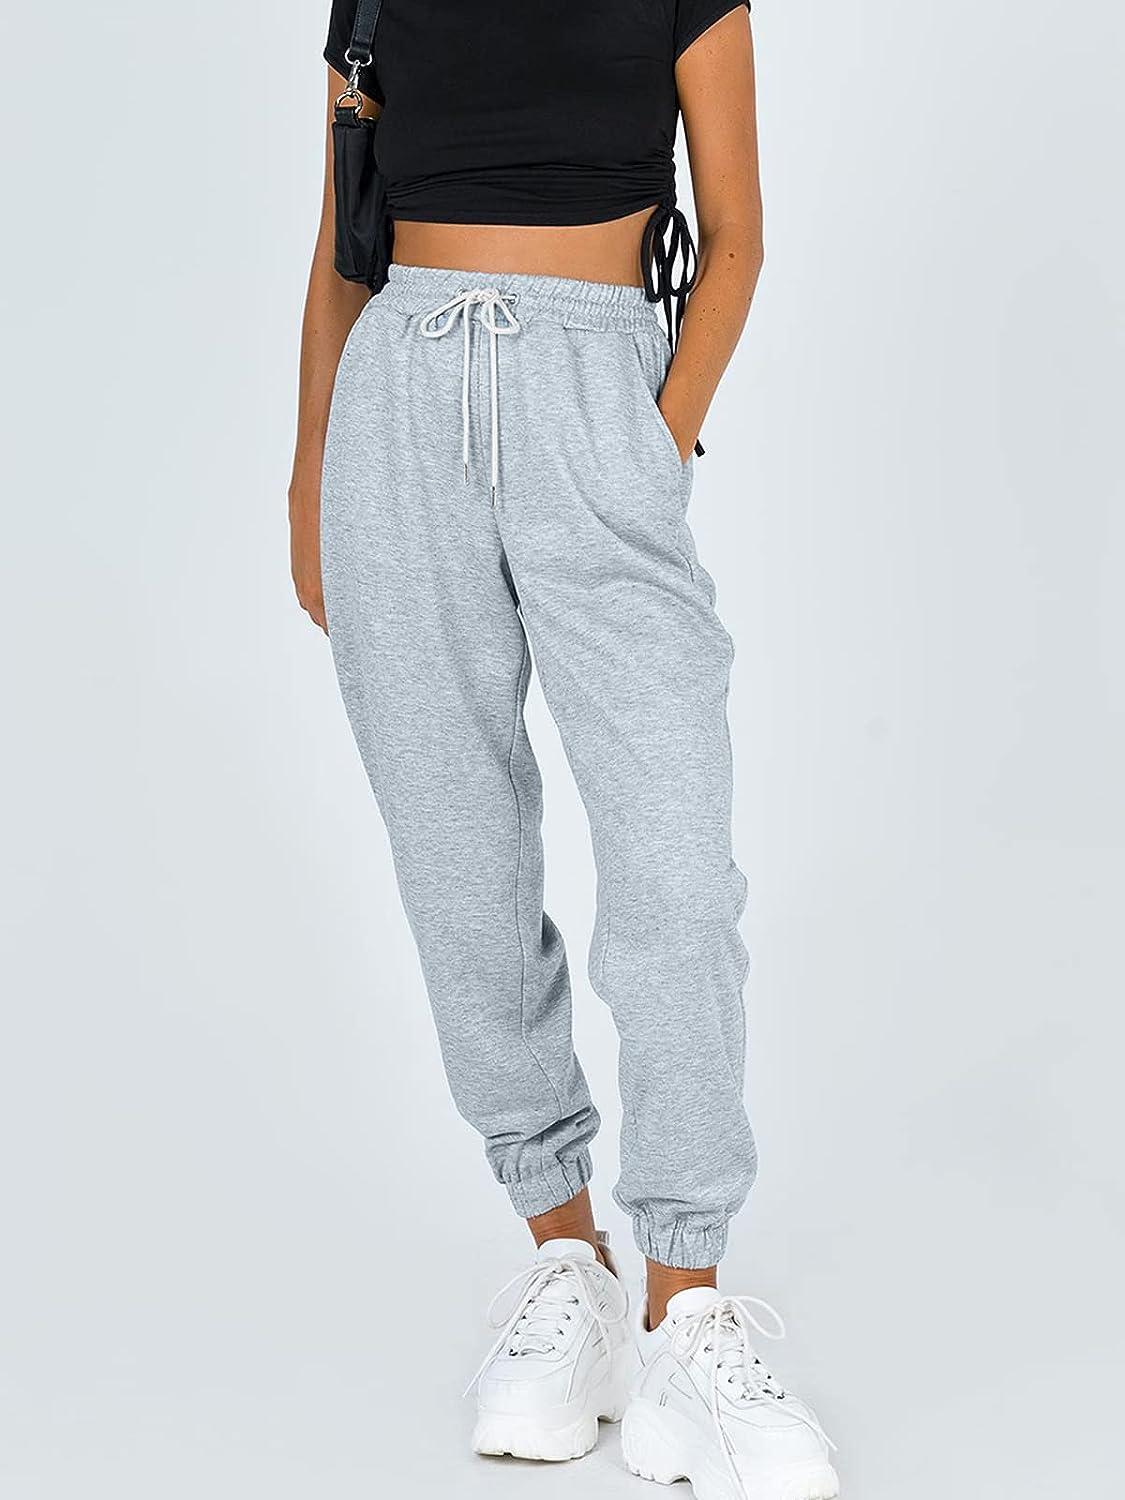 AUTOMET Baggy Sweatpants for Women with Pockets-Lounge Womens